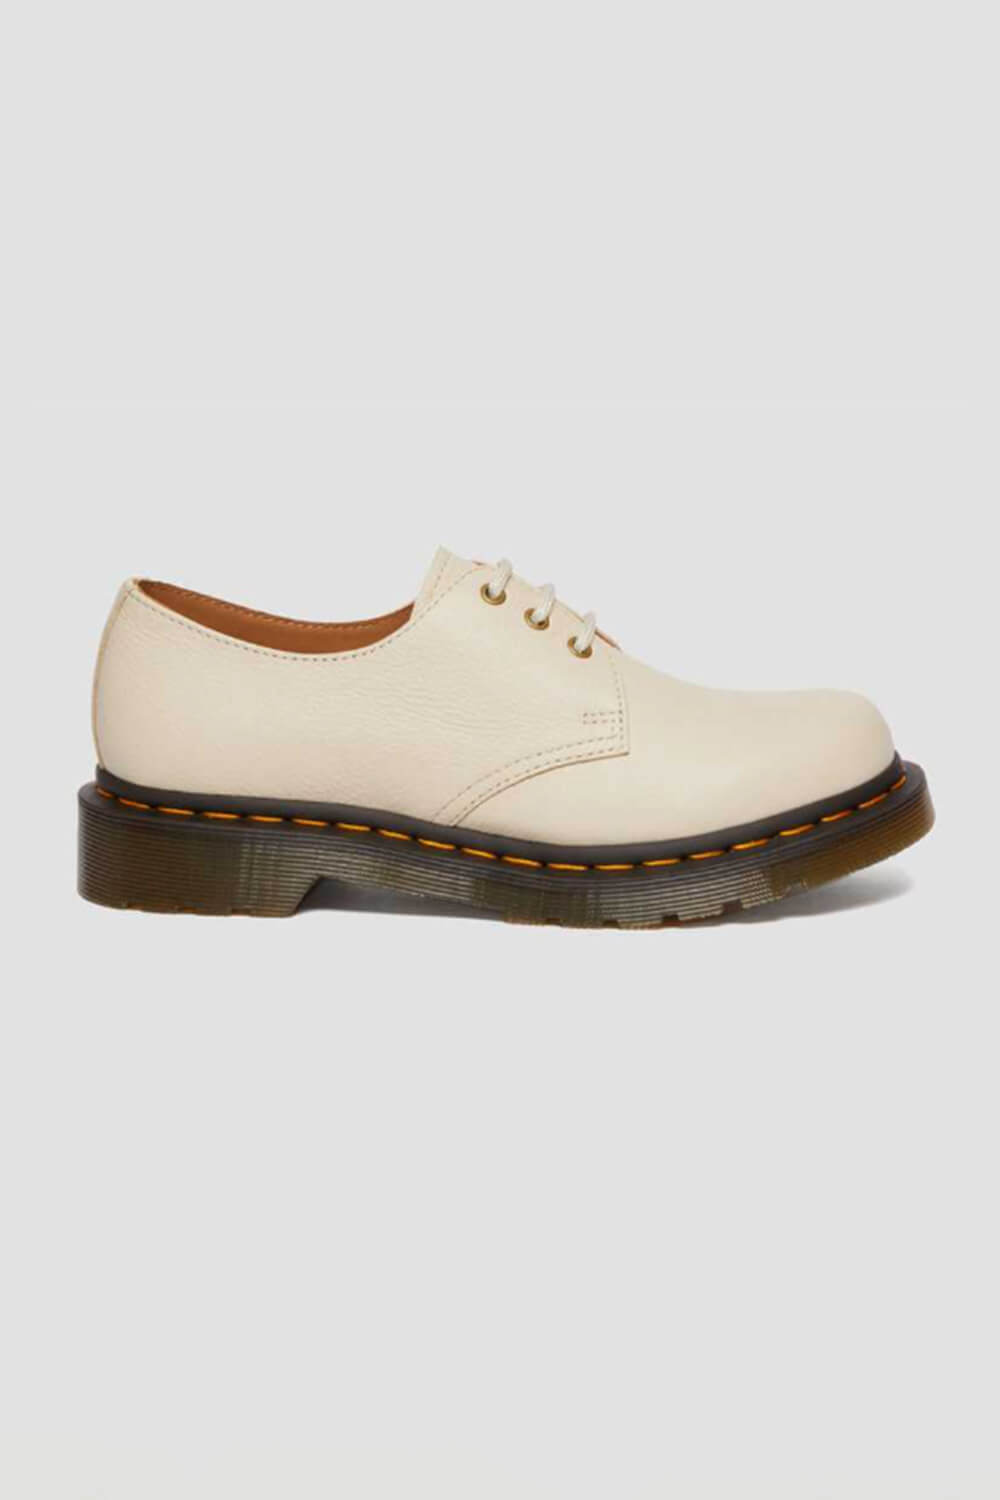 1461 Women's Virginia Leather Oxford Shoes in Parchment Beige